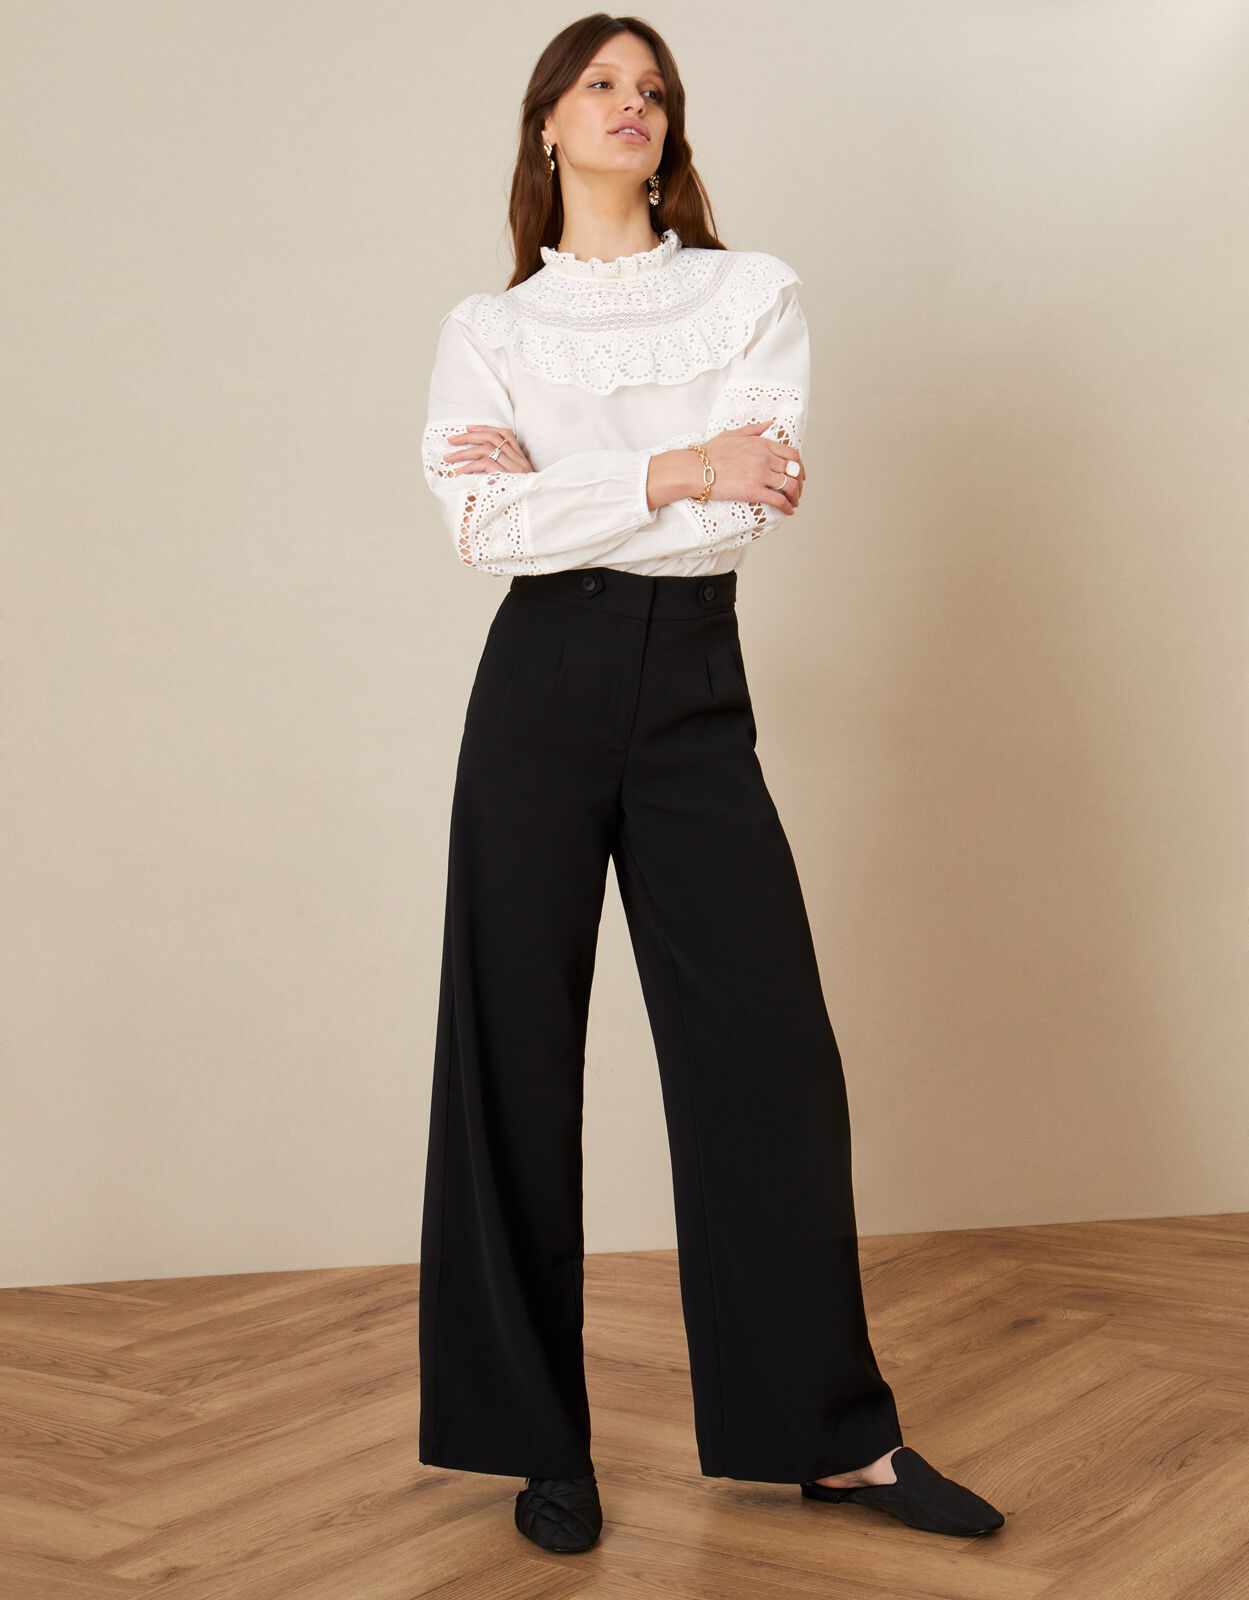 Buy Teal Polyester Solid Pants (Pants) for INR779.40 | Biba India